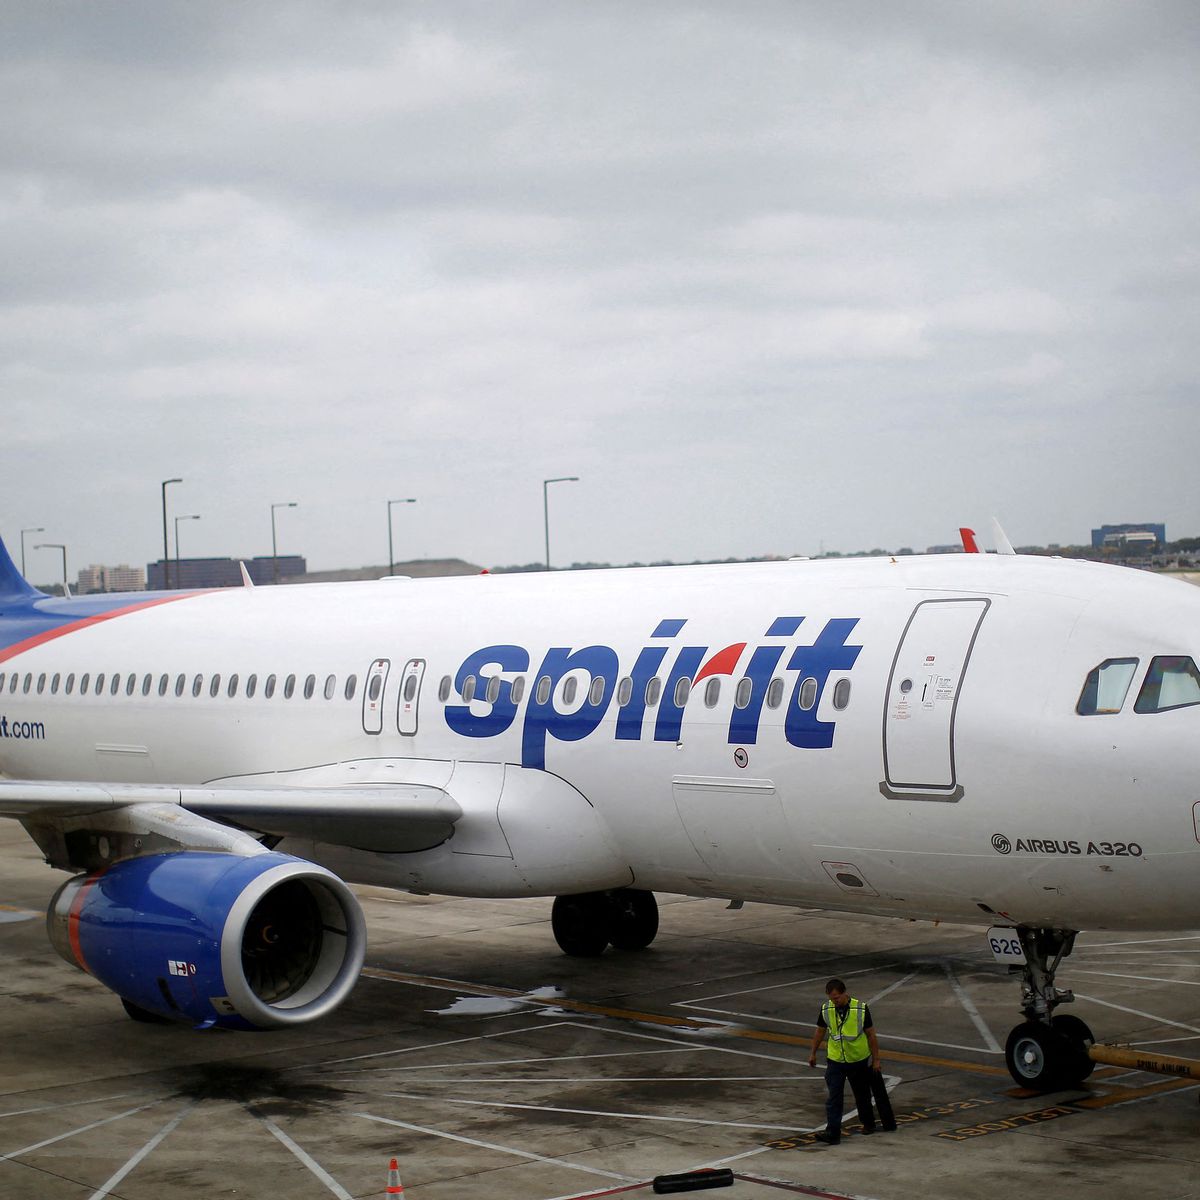 JetBlue offers spirit in an effort to deal with Frontier